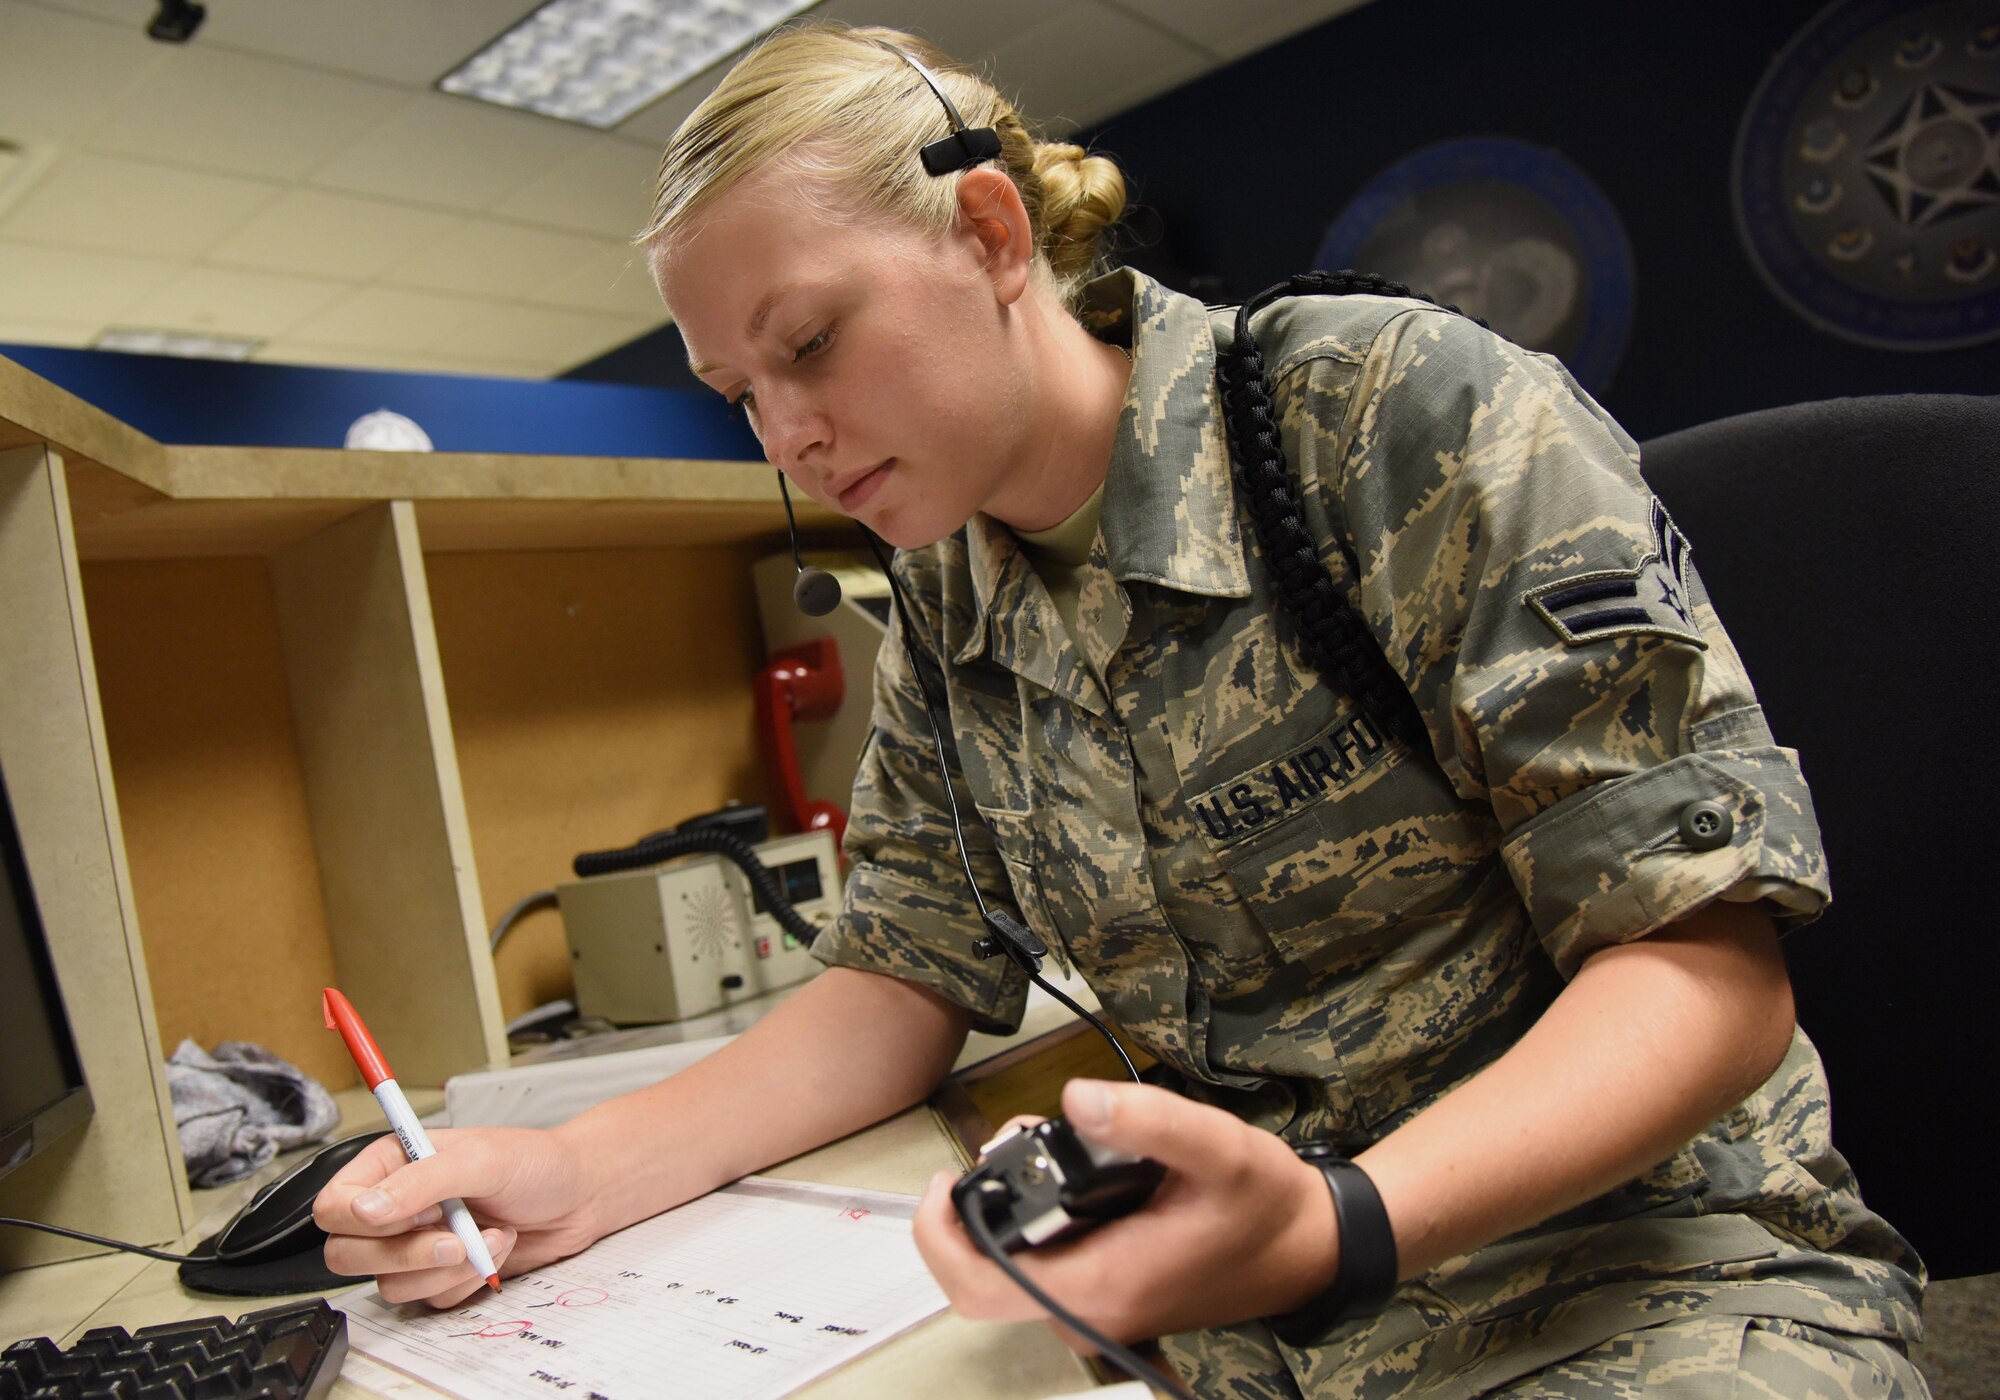 Airman 1st Class Brooke Dobbins, 334th Training Squadron student, reviews study material at Cody Hall Aug. 17, 2017, on Keesler Air Force Base, Miss. Dobbins will graduate with perfect scores throughout the aviation resource management apprentice course Aug. 18. After graduation she will return to the 465th Air Refueling Squadron, Tinker Air Force Base, Okla. (U.S. Air Force photo by Kemberly Groue)